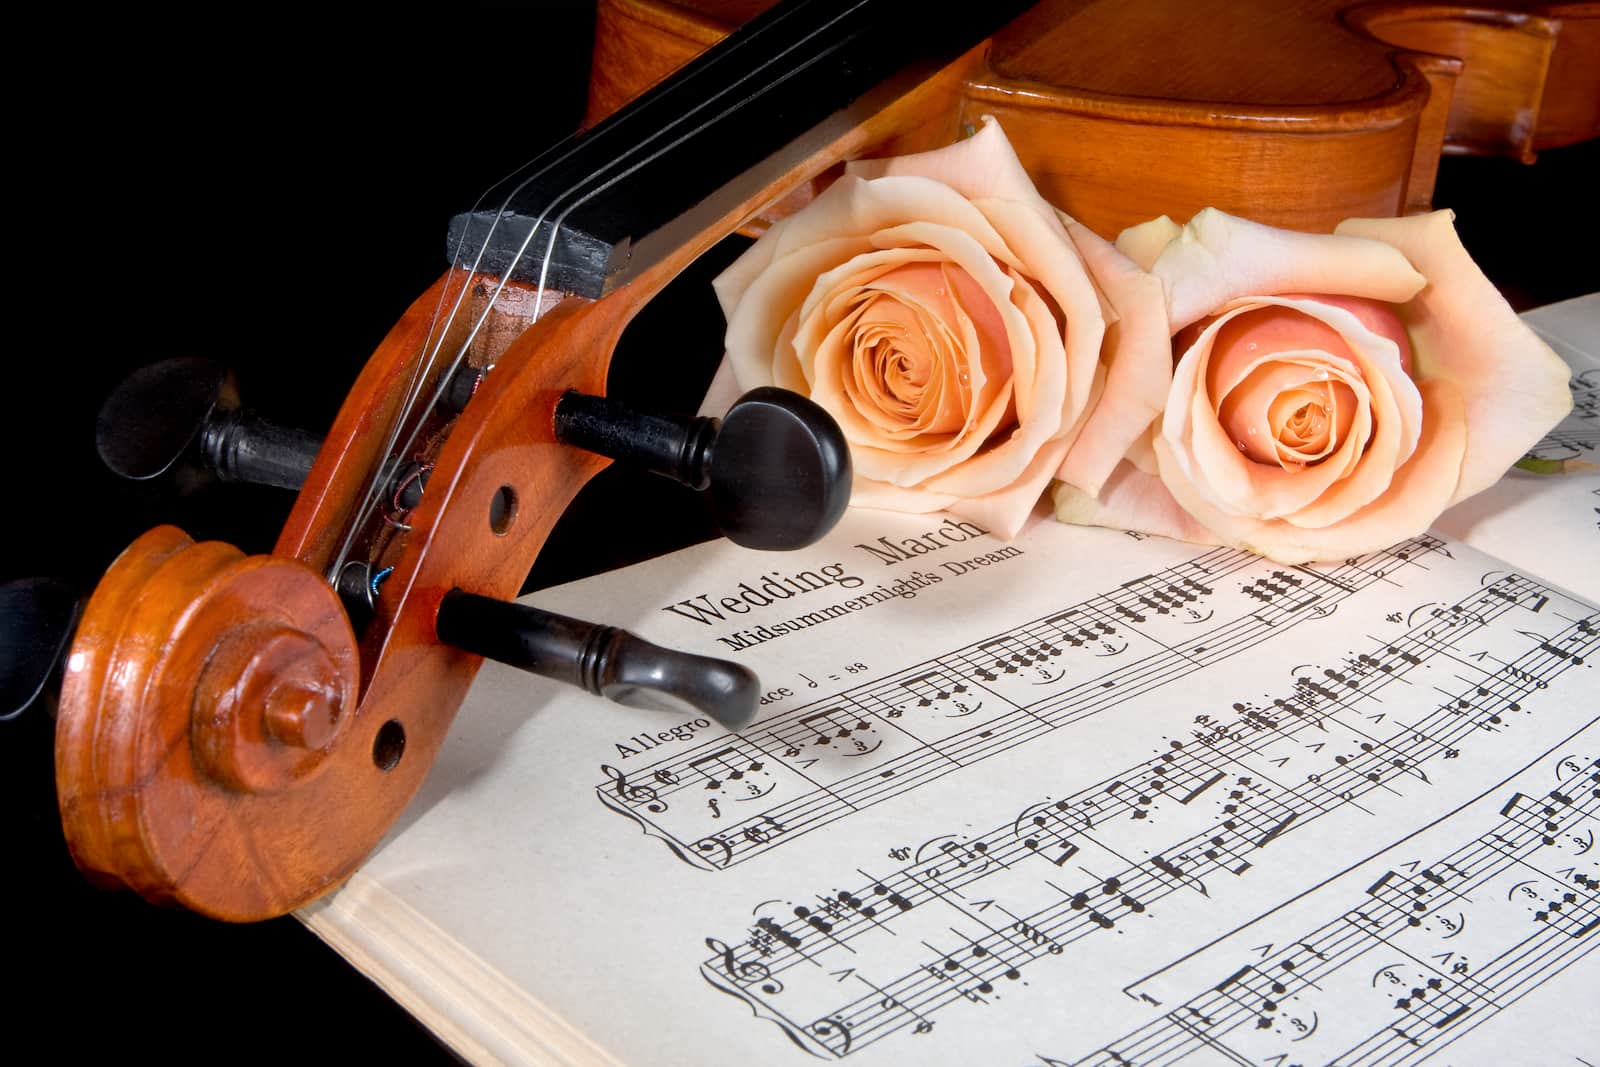 A Violin Placed On Top Of A Wedding Music Score Sheet.